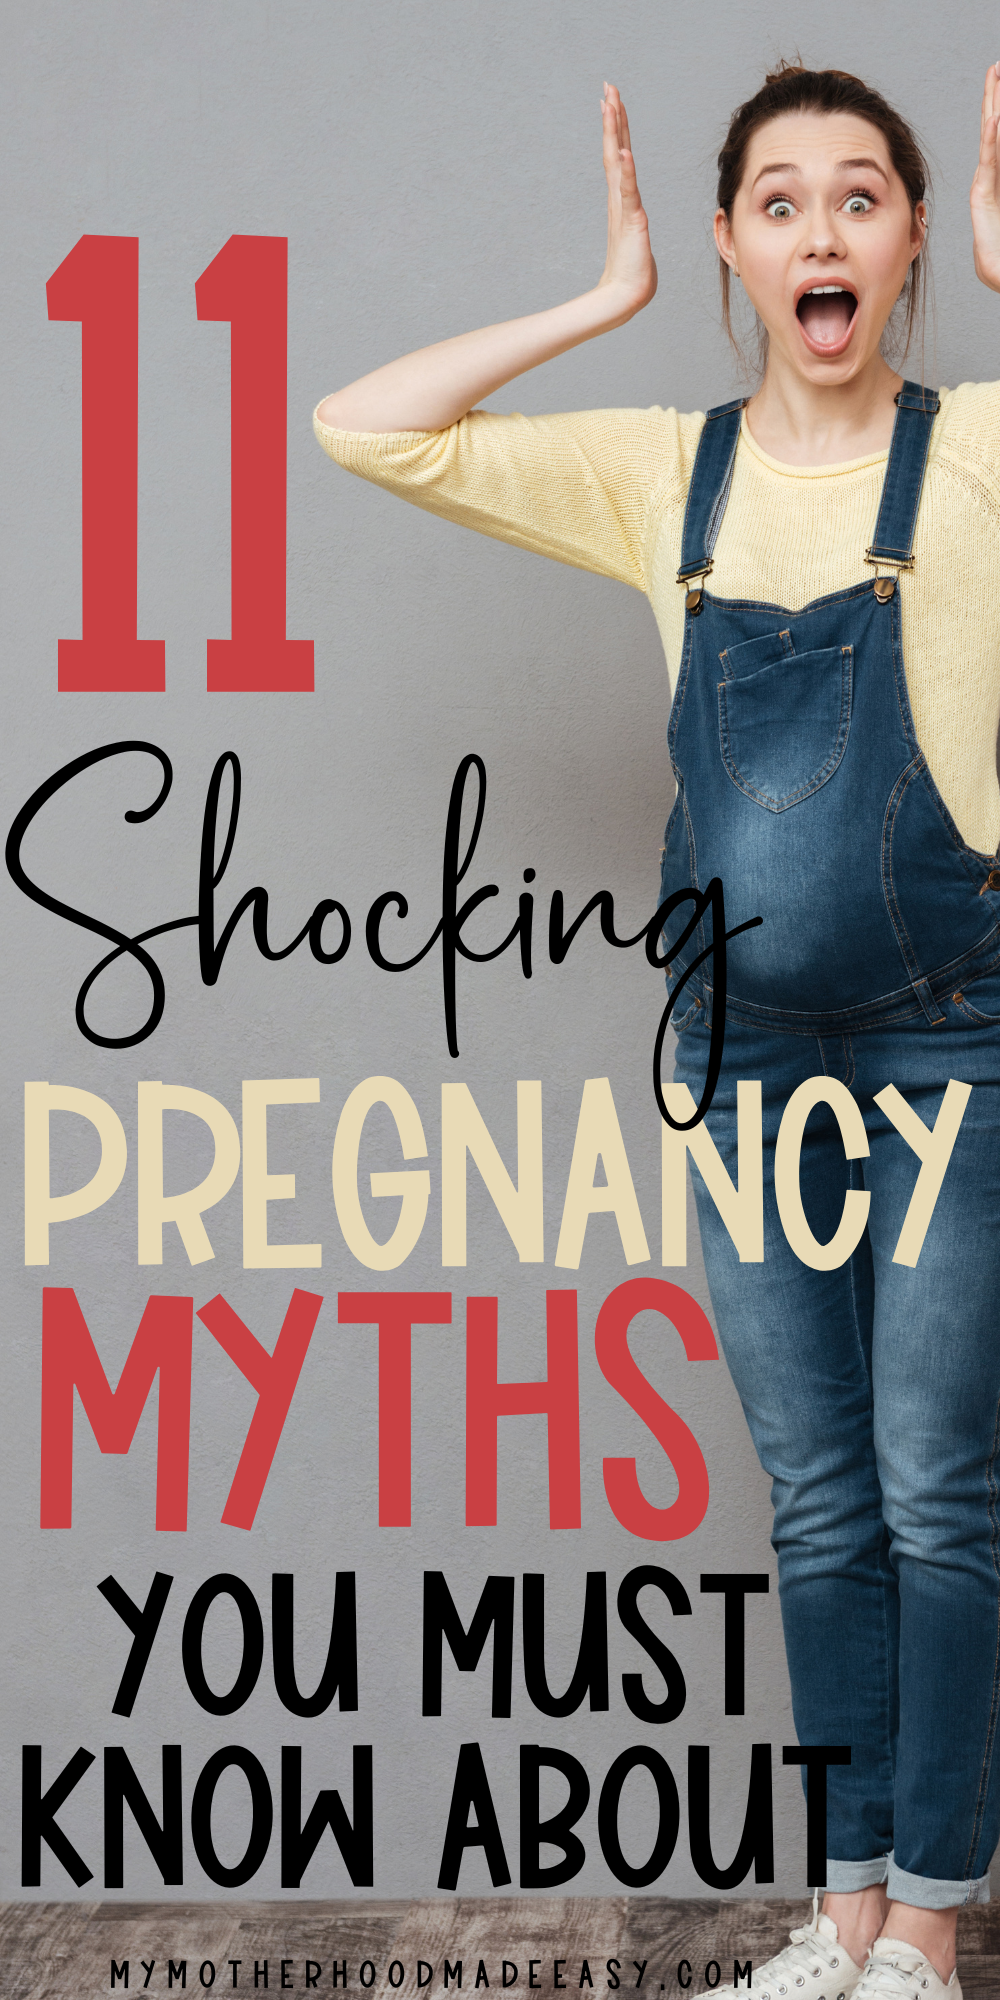 11 Shocking pregnancy myths facts You Need to Know